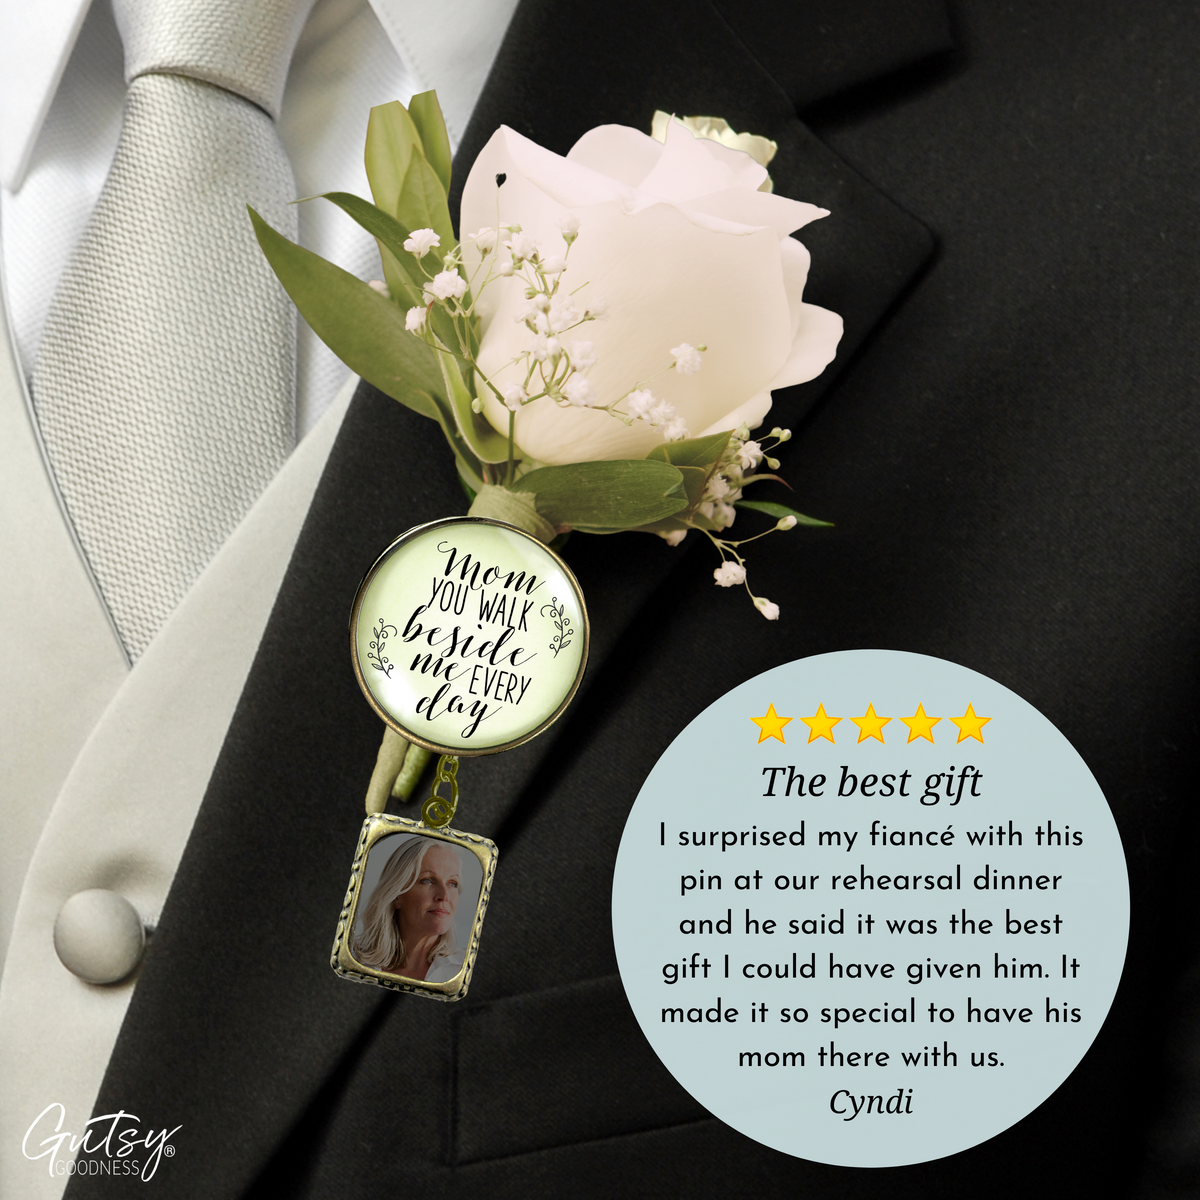 Wedding Memorial Boutonniere Pin Photo Frame Honor Mom Vintage Cream For Men - Gutsy Goodness